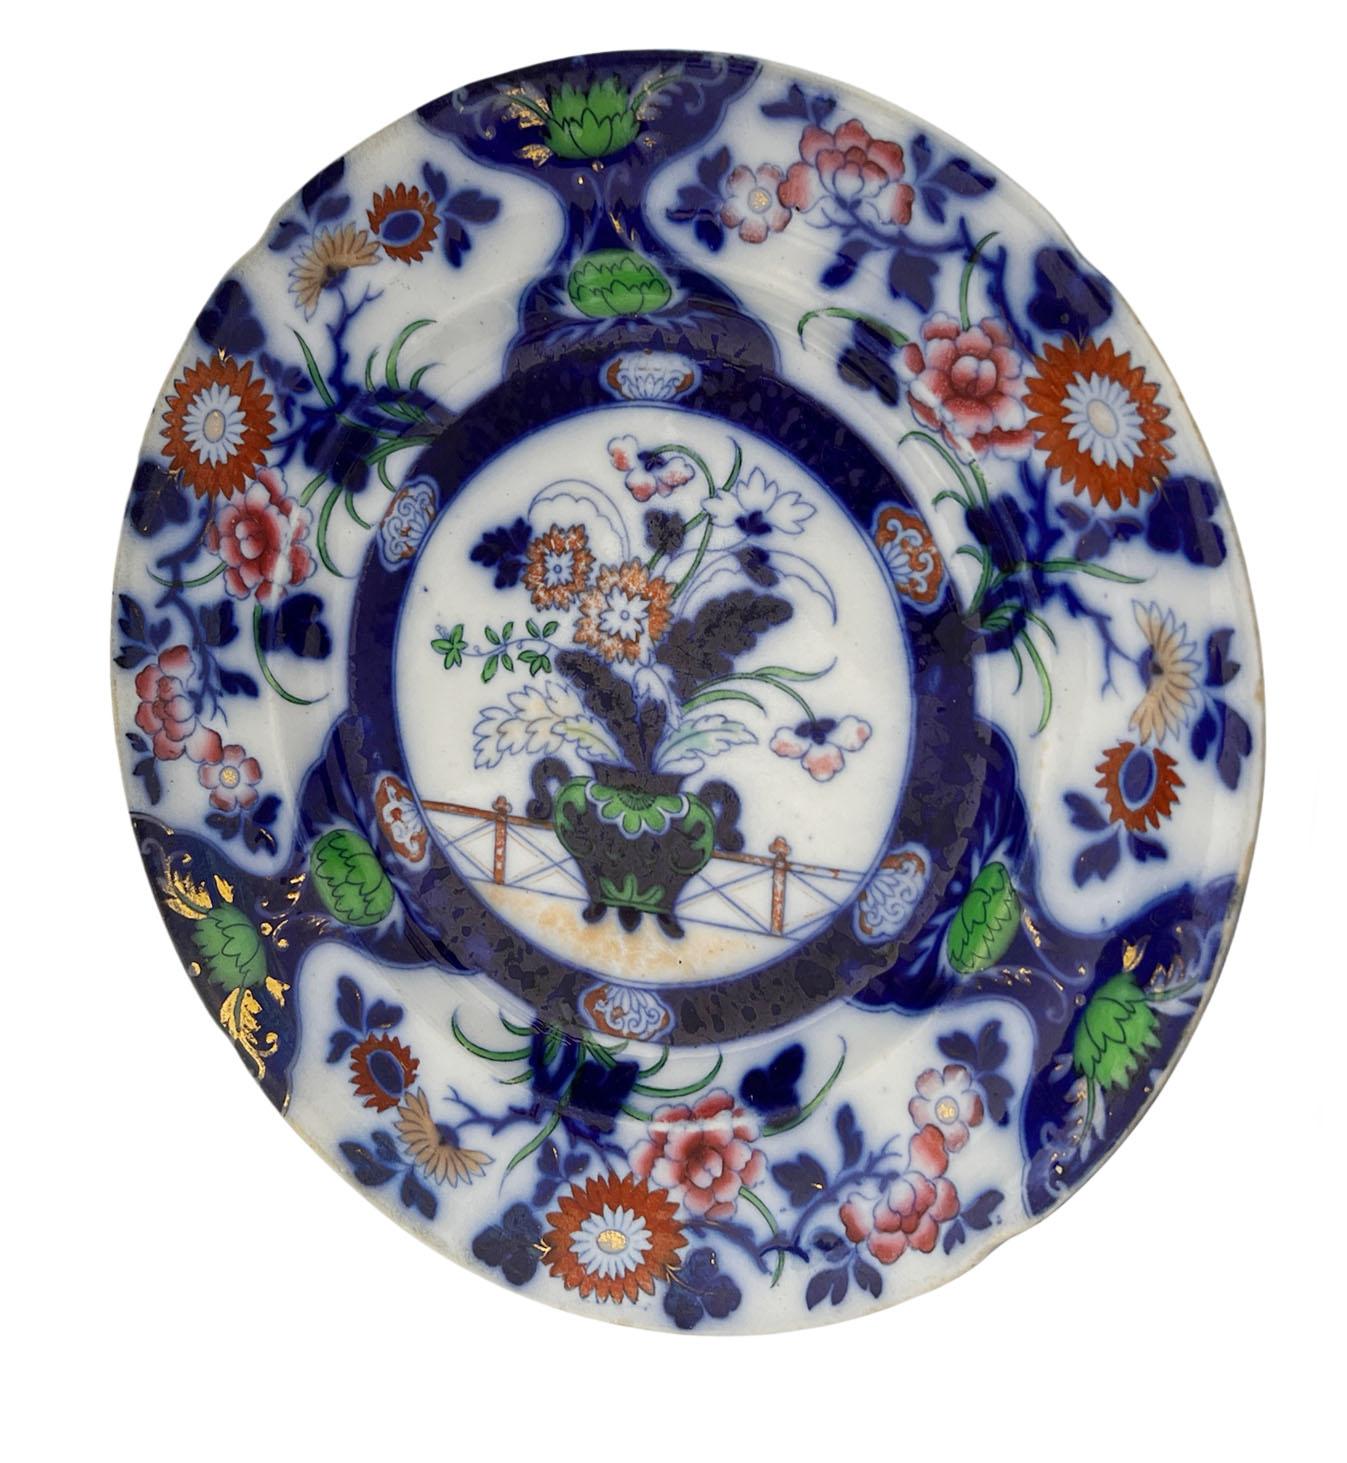 Hicks & Meigh enameled Imari ironstone plate in cobalt, vivid green and iron red. Center vase with chrysanthemums, peonies and blossoms. Blue underglaze on reverse with mark and numbered 3/1053. Regency period, England, circa 1822 - 1835.